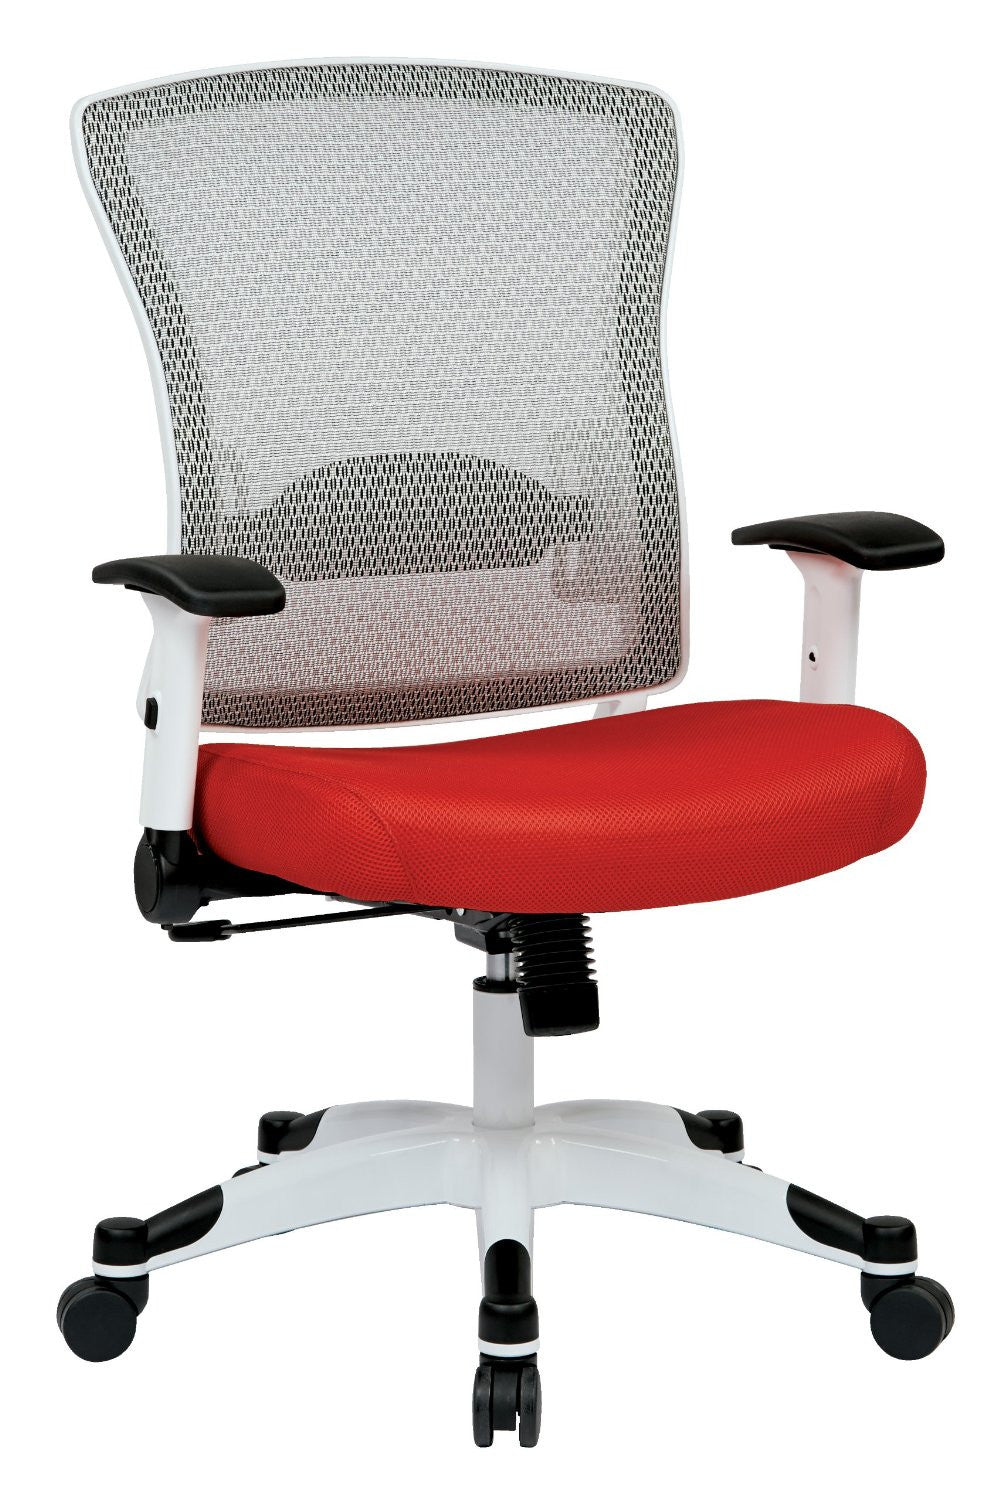 Space Seating 317w-w1c1f2w-9 White Frame Managers Chair (red)